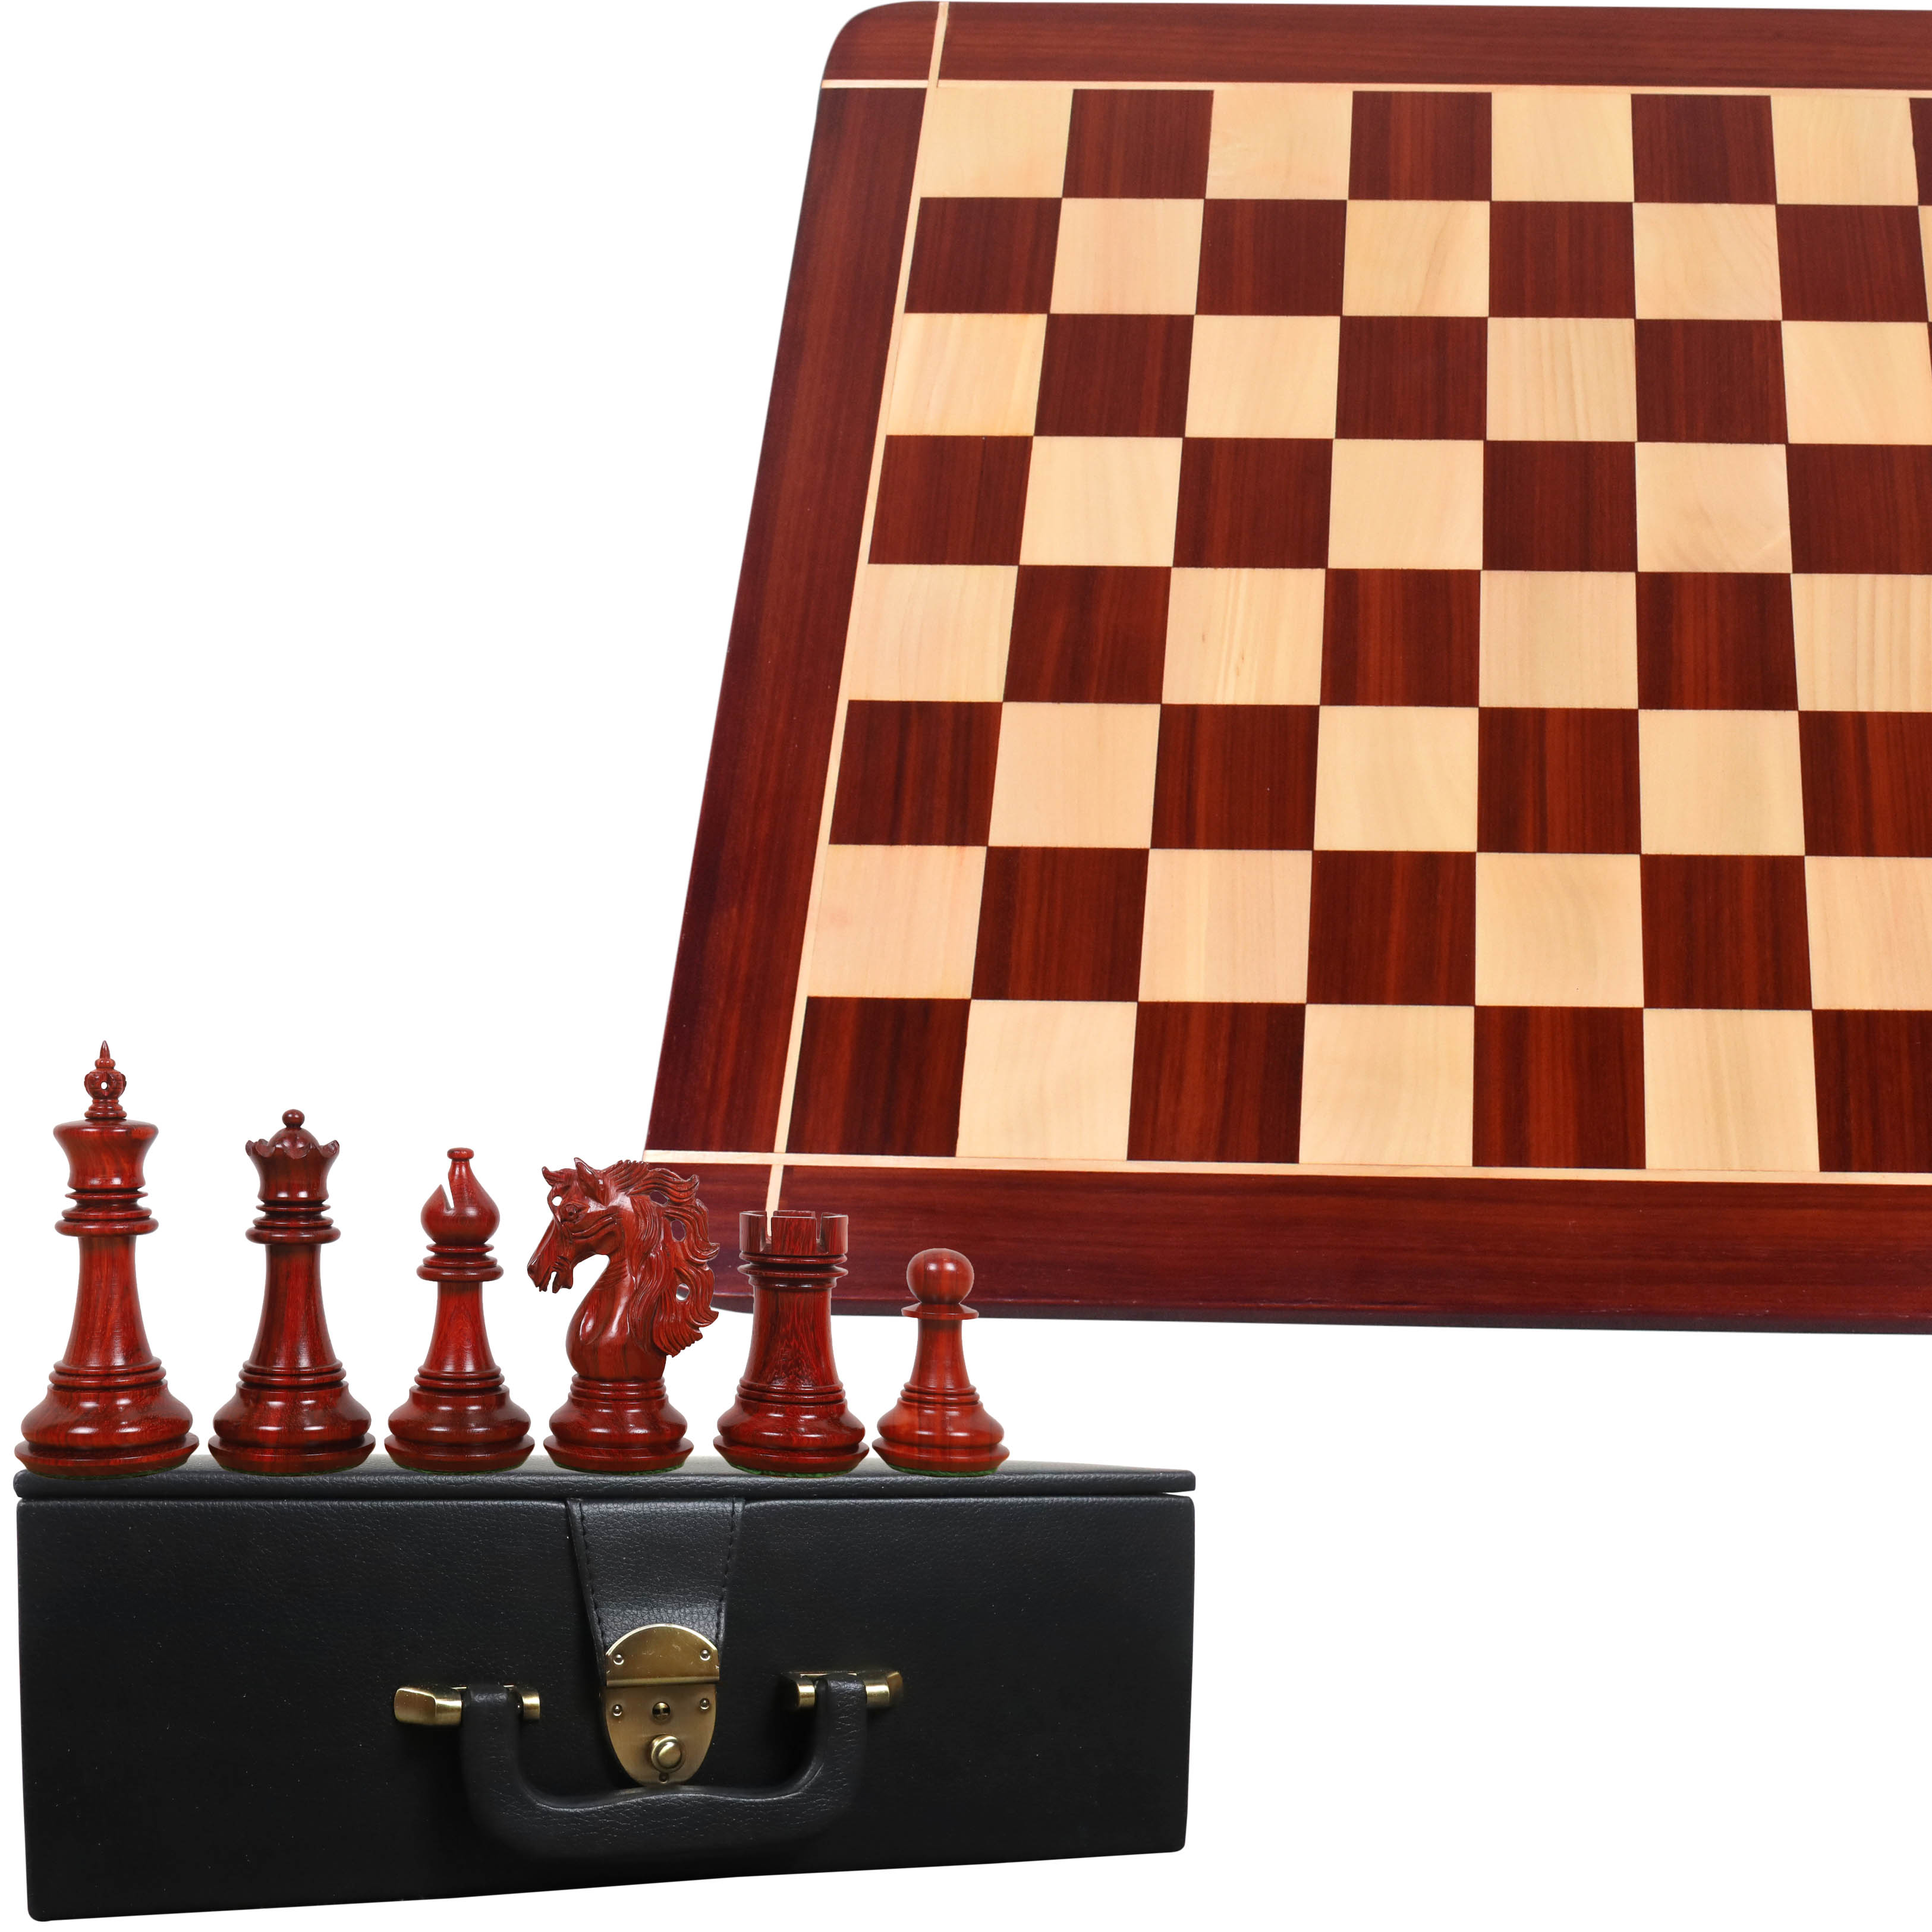 Historical Antique Rome Patterned Chess Set Luxury Chess Set